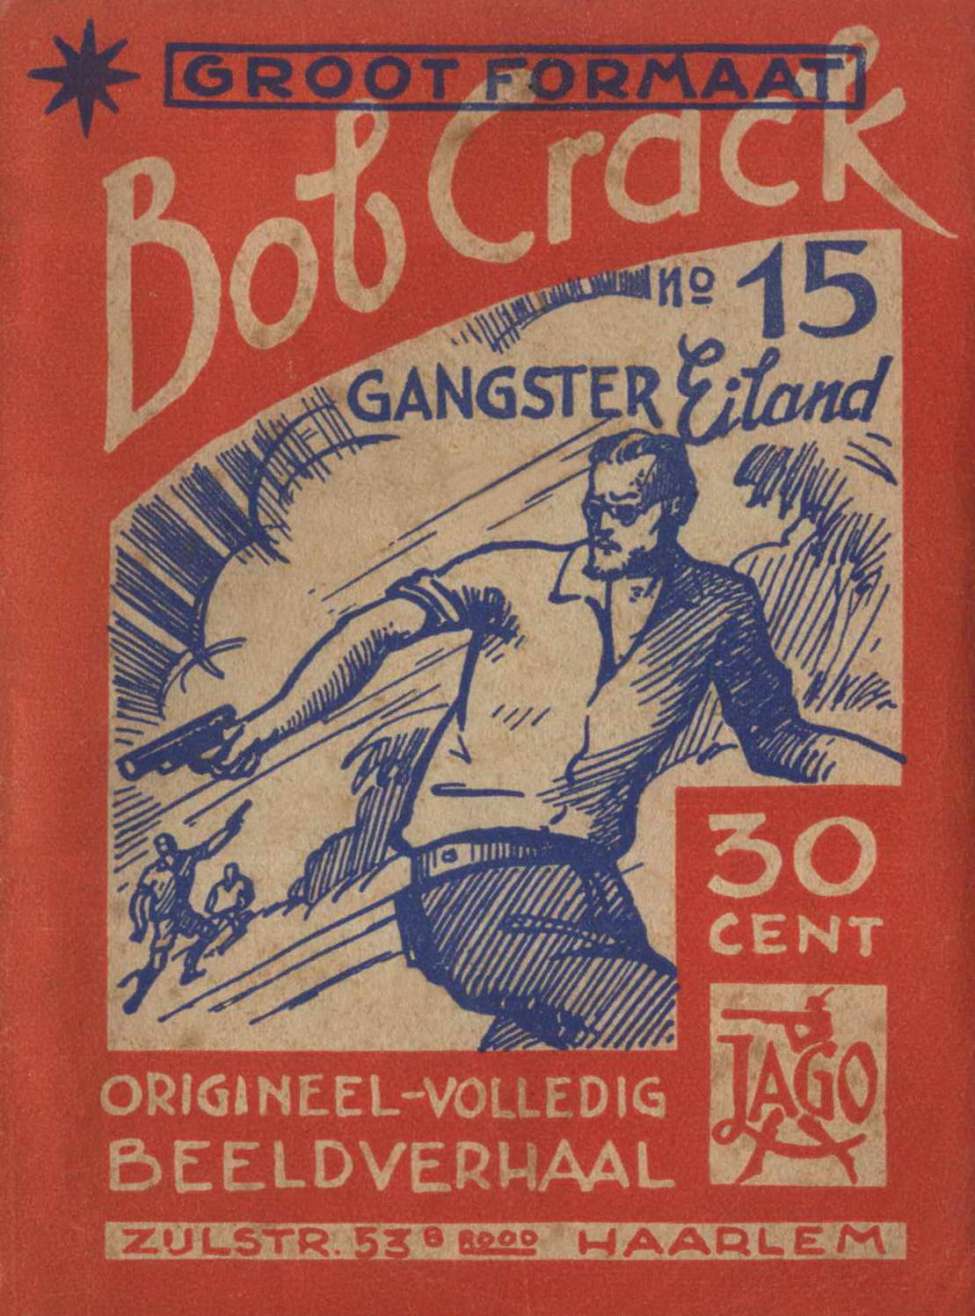 Book Cover For Bob Crack 15 Gangster eiland